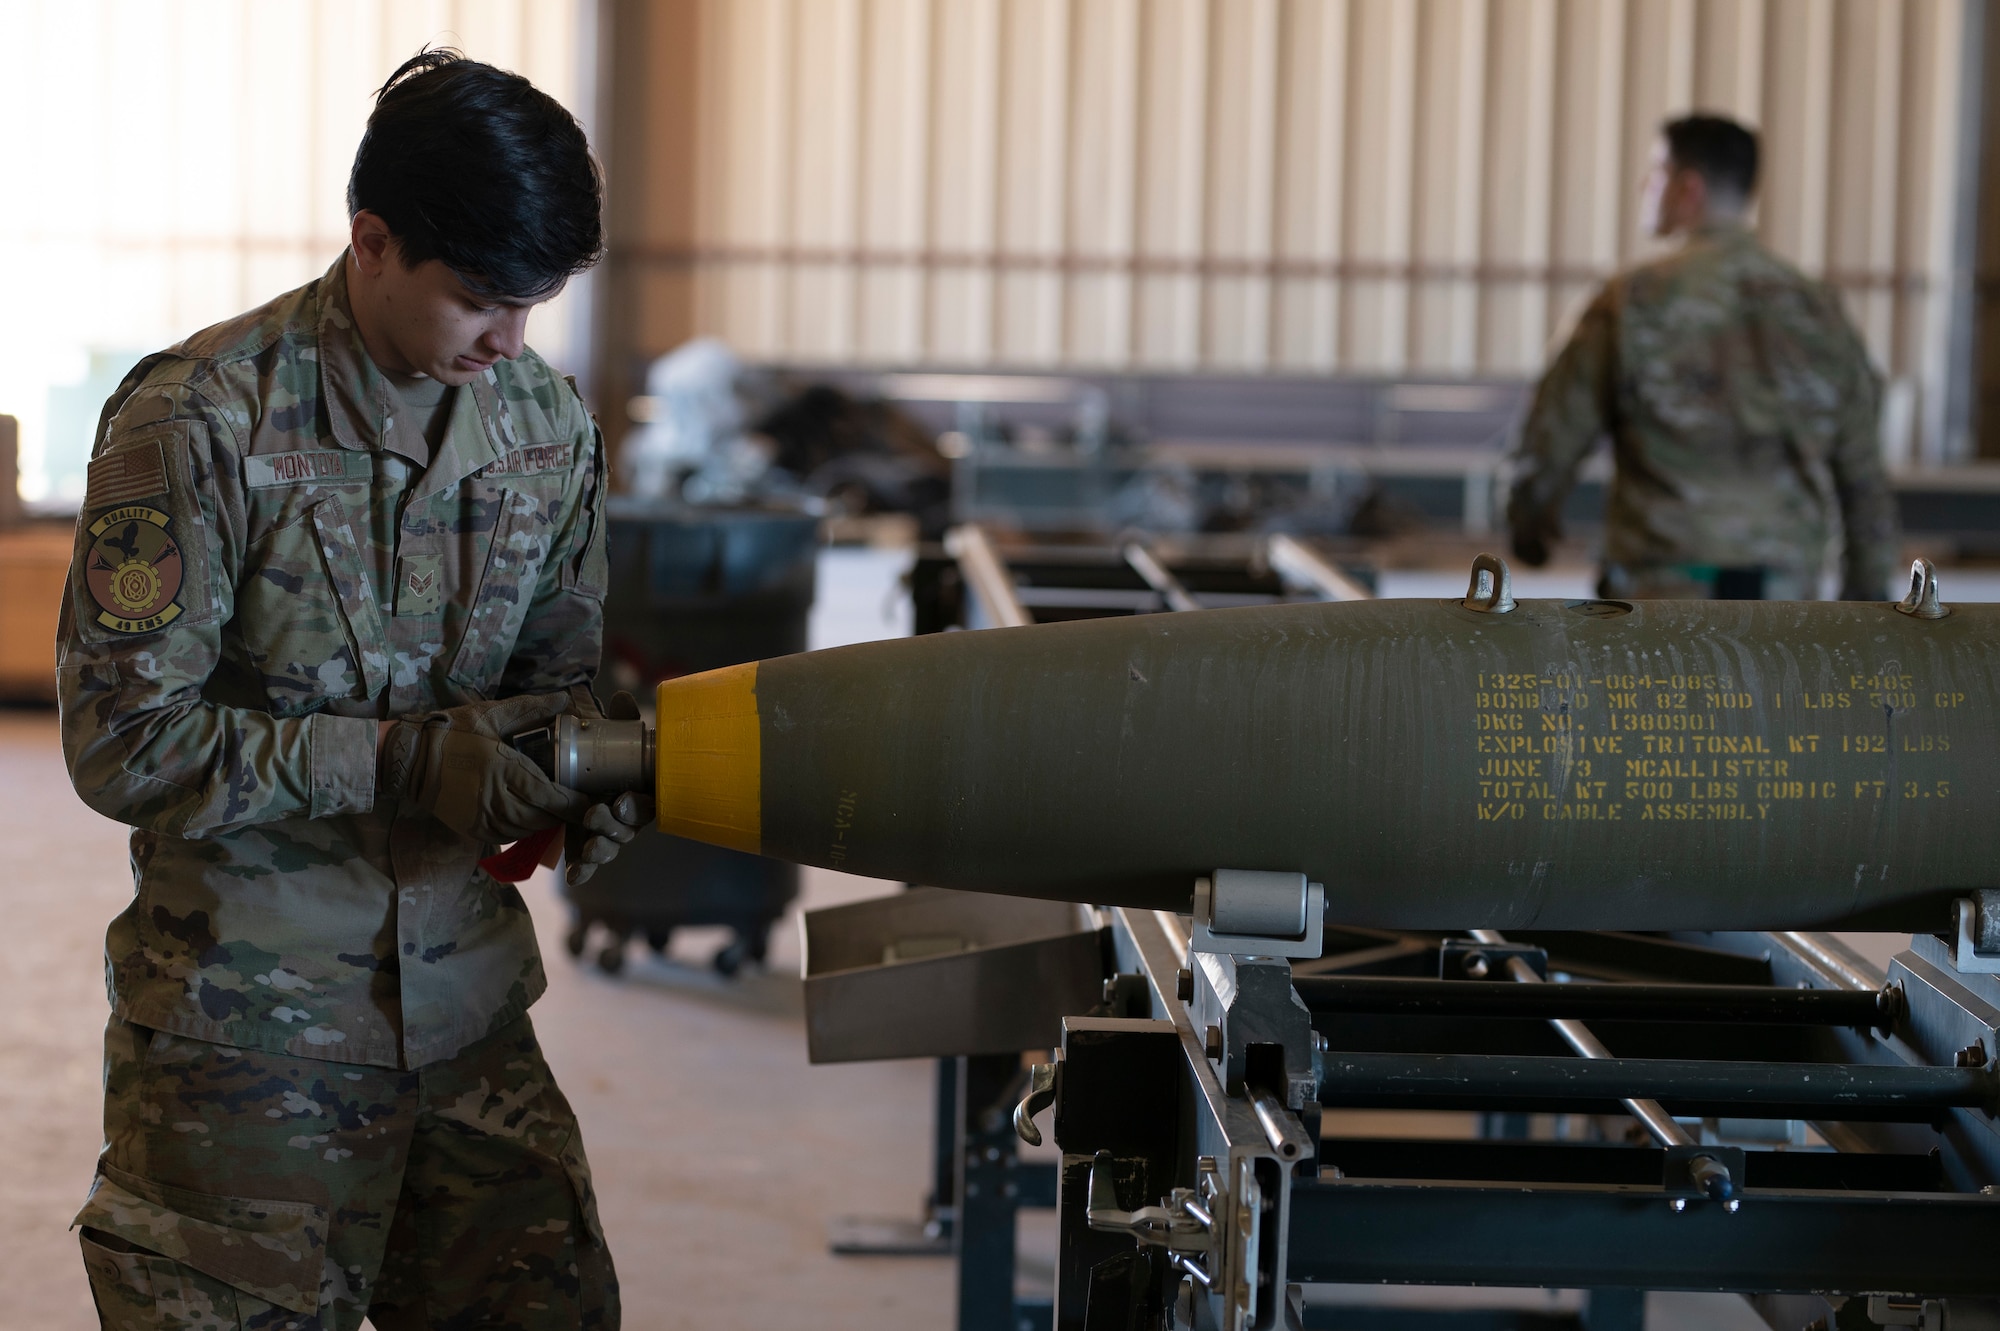 U.S. Air Force Senior Airman Samuel Montoya, 49th Equipment Maintenance Squadron crew chief, constructs a Mark 82 bomb at Holloman Air Force Base, New Mexico, Feb. 21, 2024. Assembling MK-82’s provides realistic training for Airmen in real-time war scenarios to test their readiness capabilities. (U.S. Air Force photo by Airman 1st Class Michelle Ferrari)